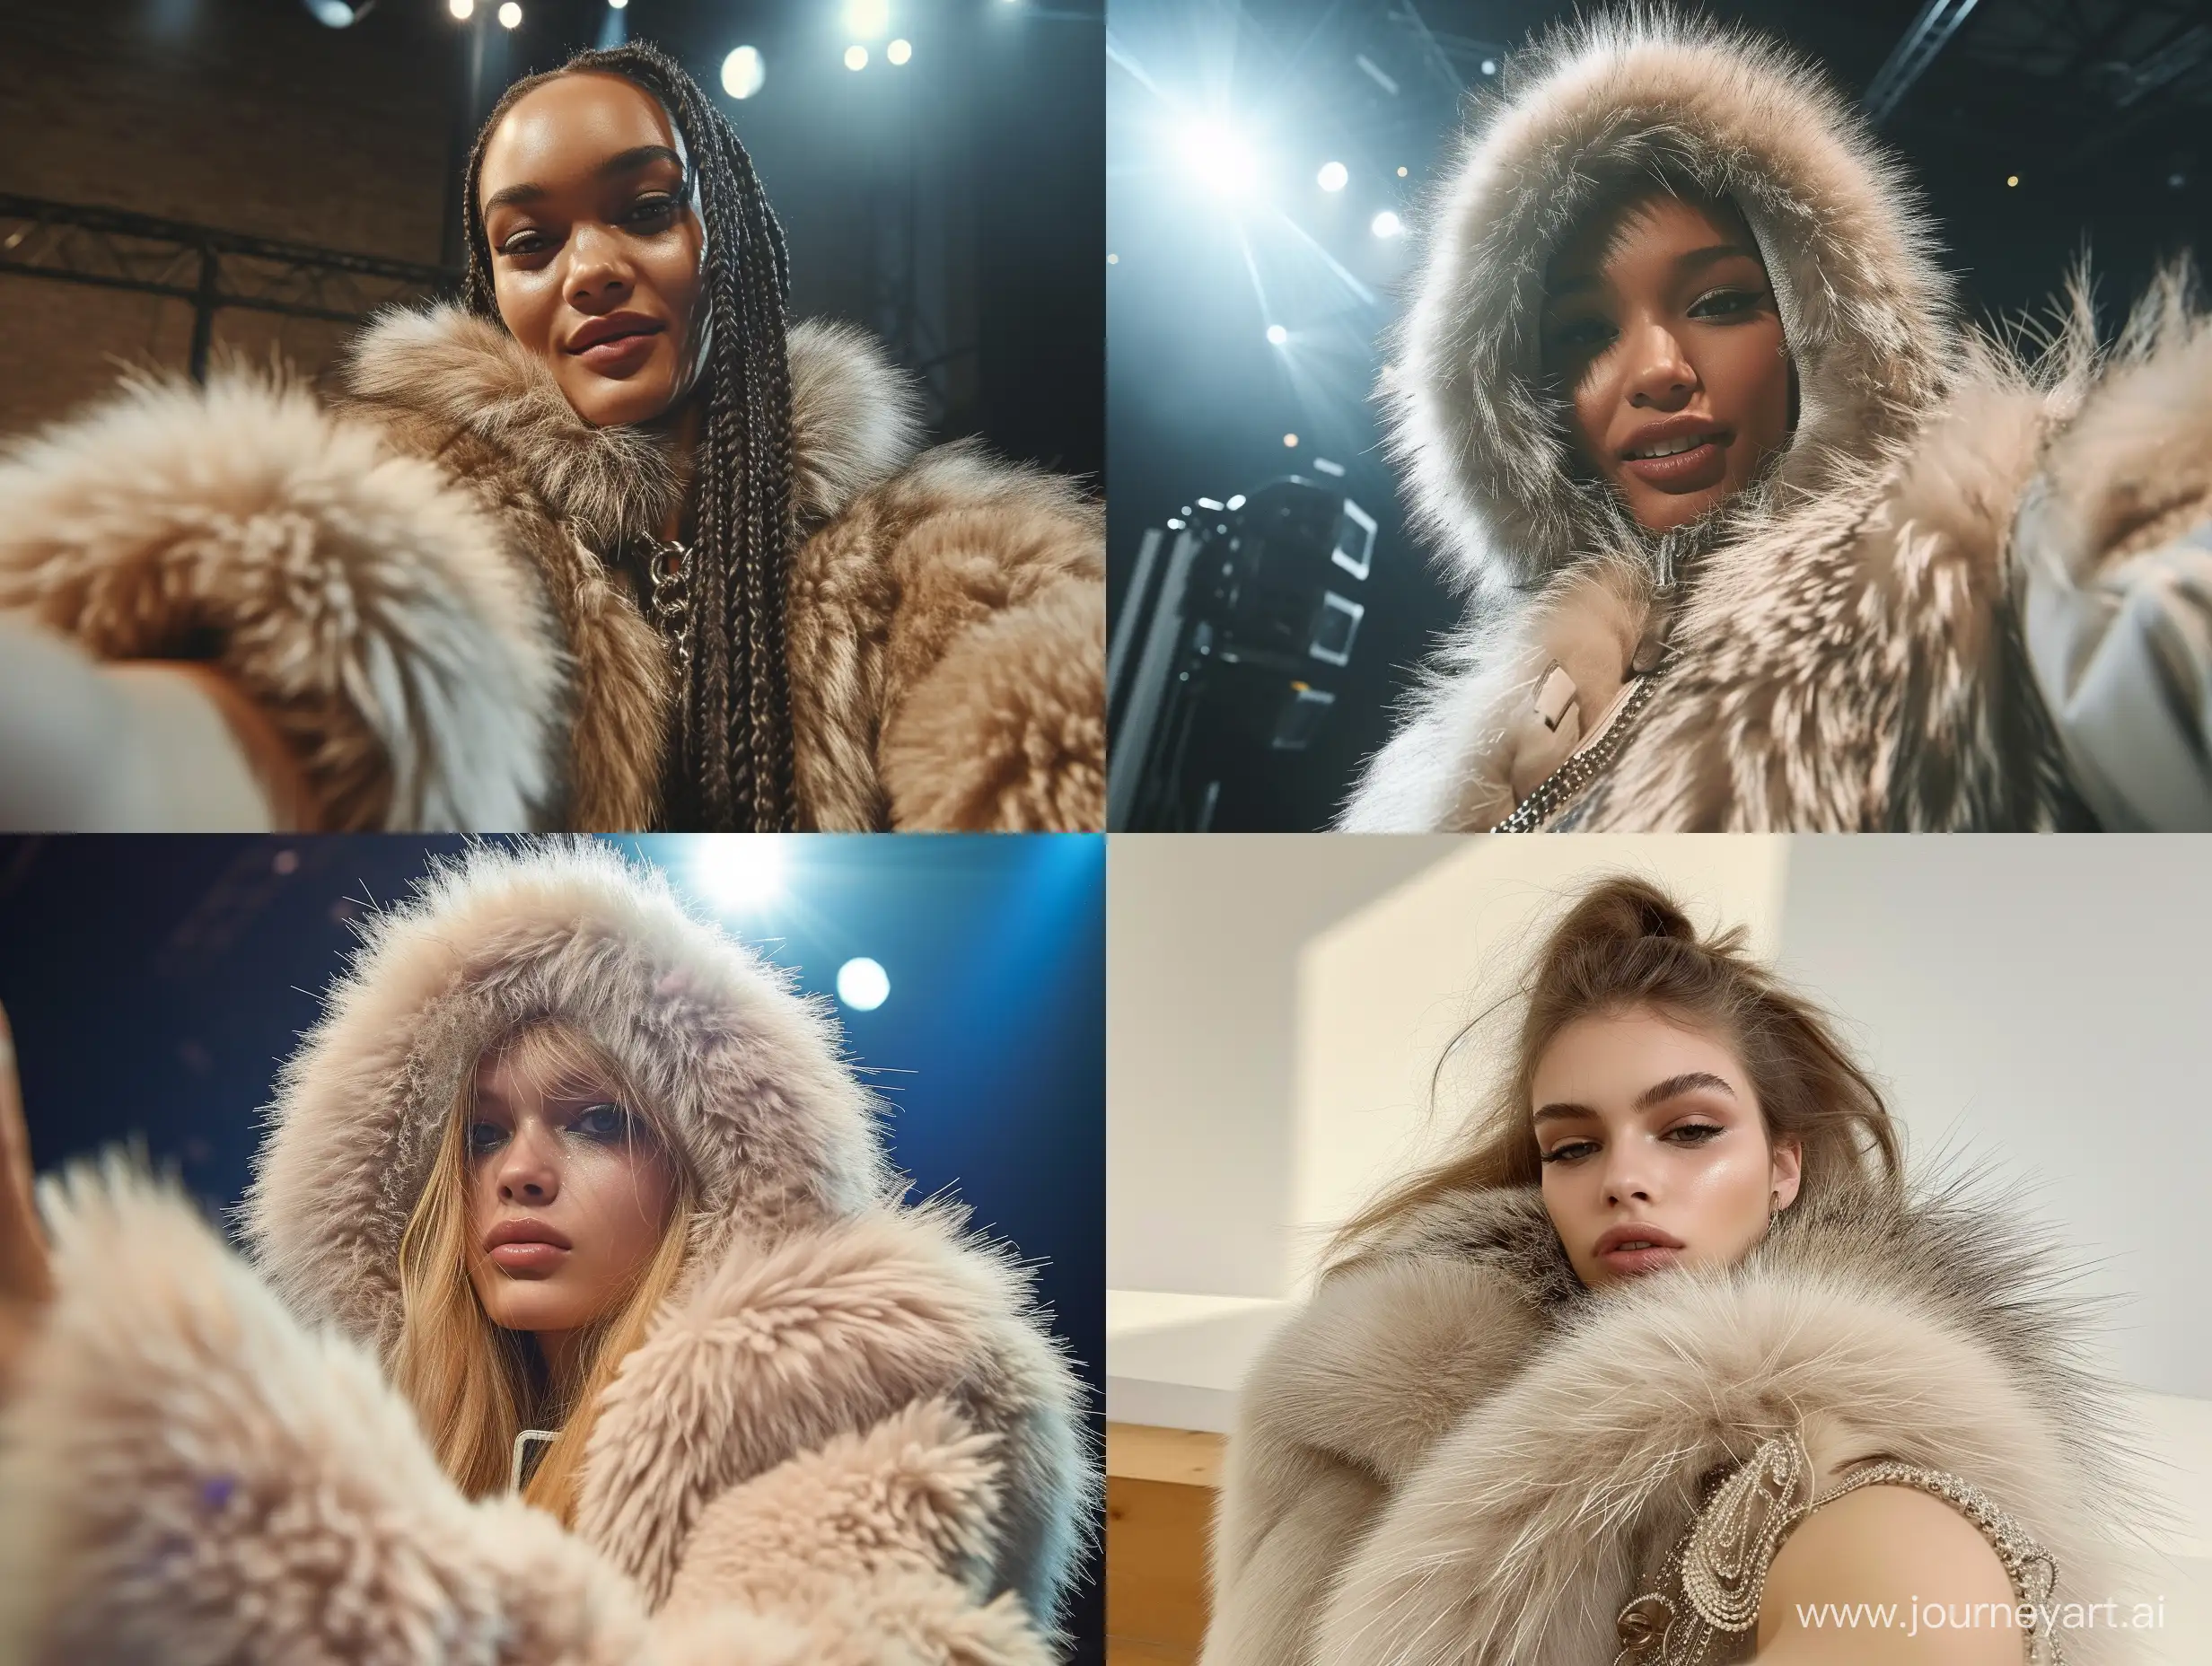 Top-Model-Captures-Selfie-Moment-in-Luxurious-Fluffy-Fur-Coat-on-Fashion-Runway